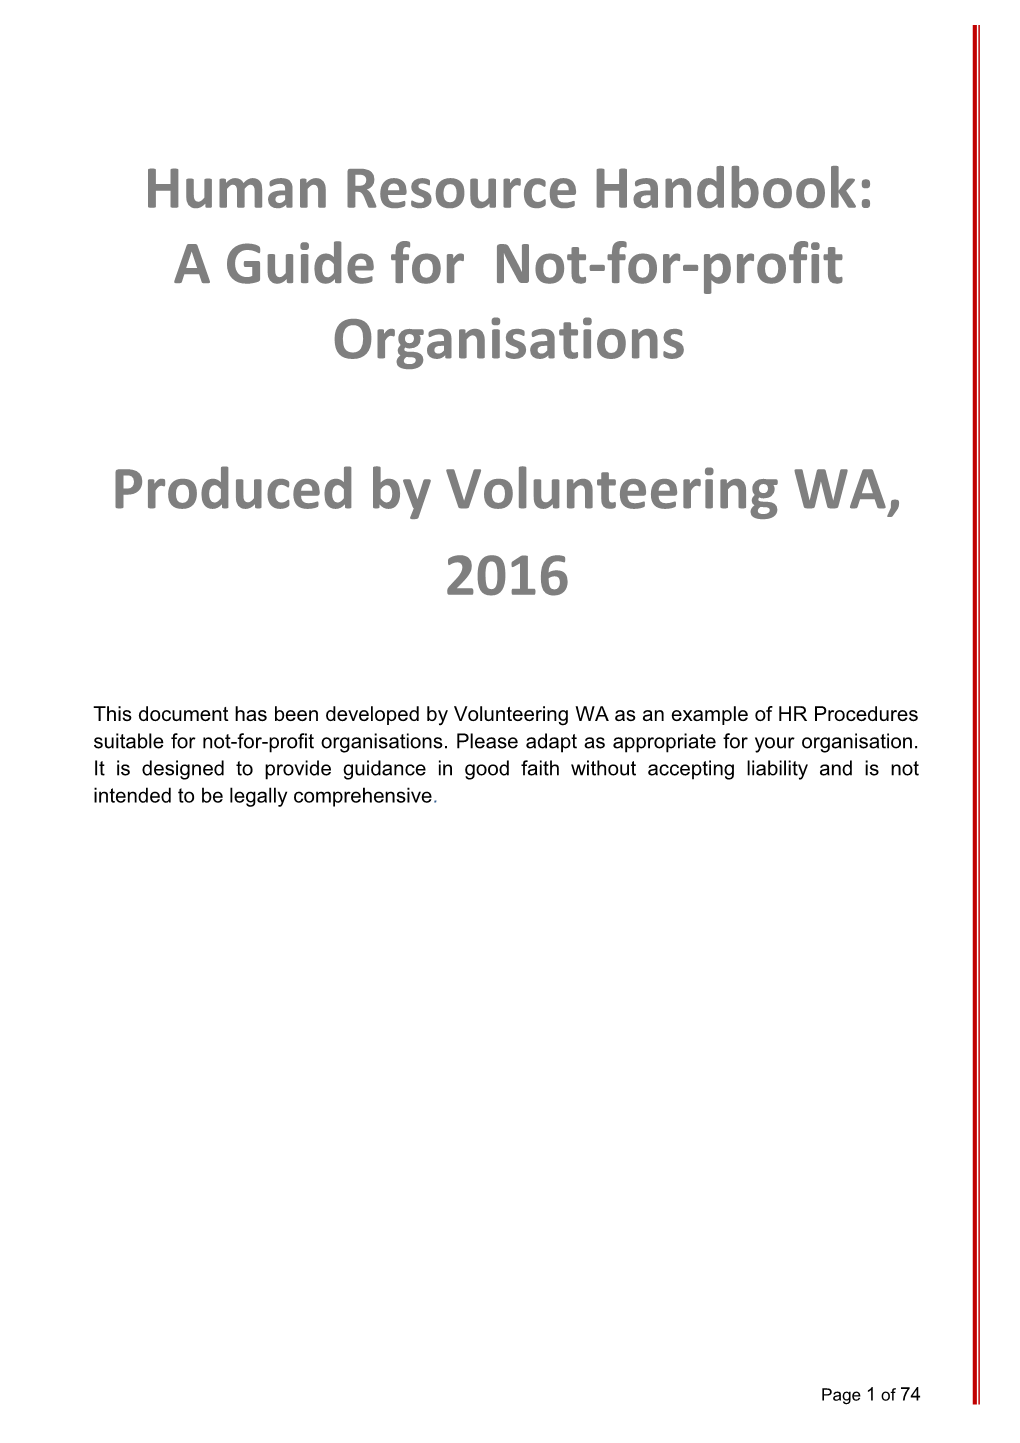 A Guide for Not-For-Profit Organisations